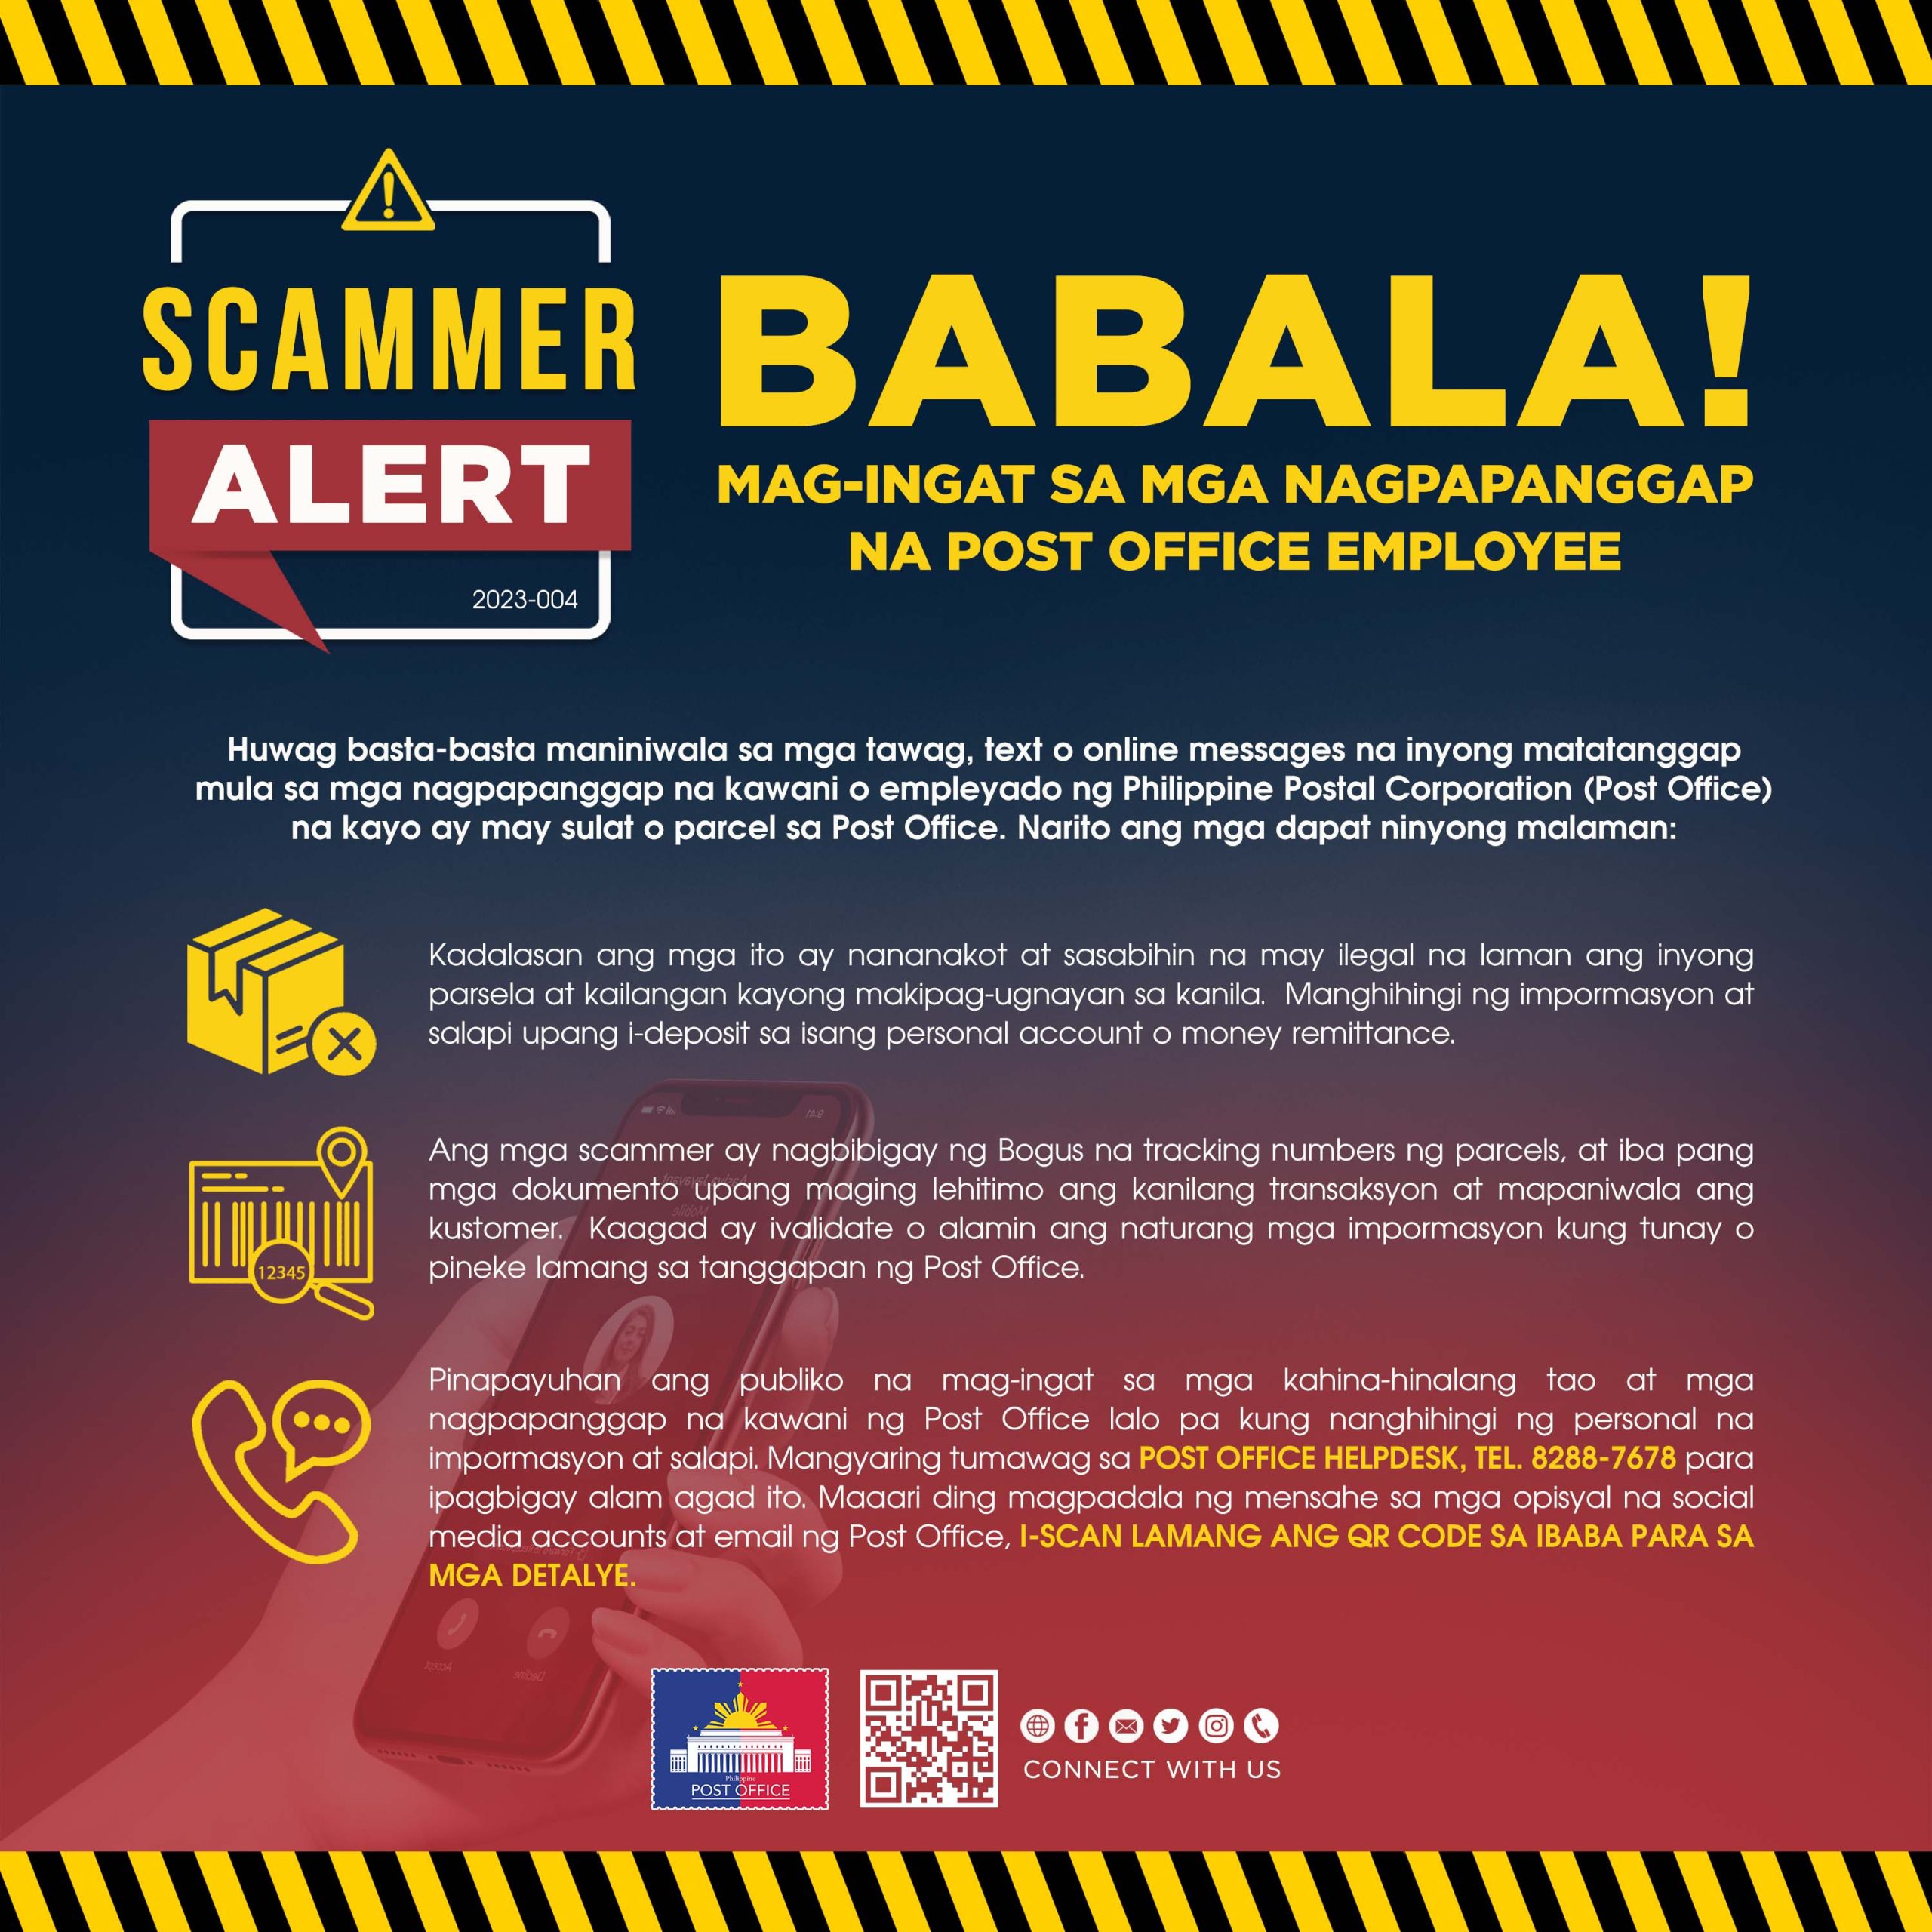 PHLPost warns public of scammers impersonating a Post Office employee